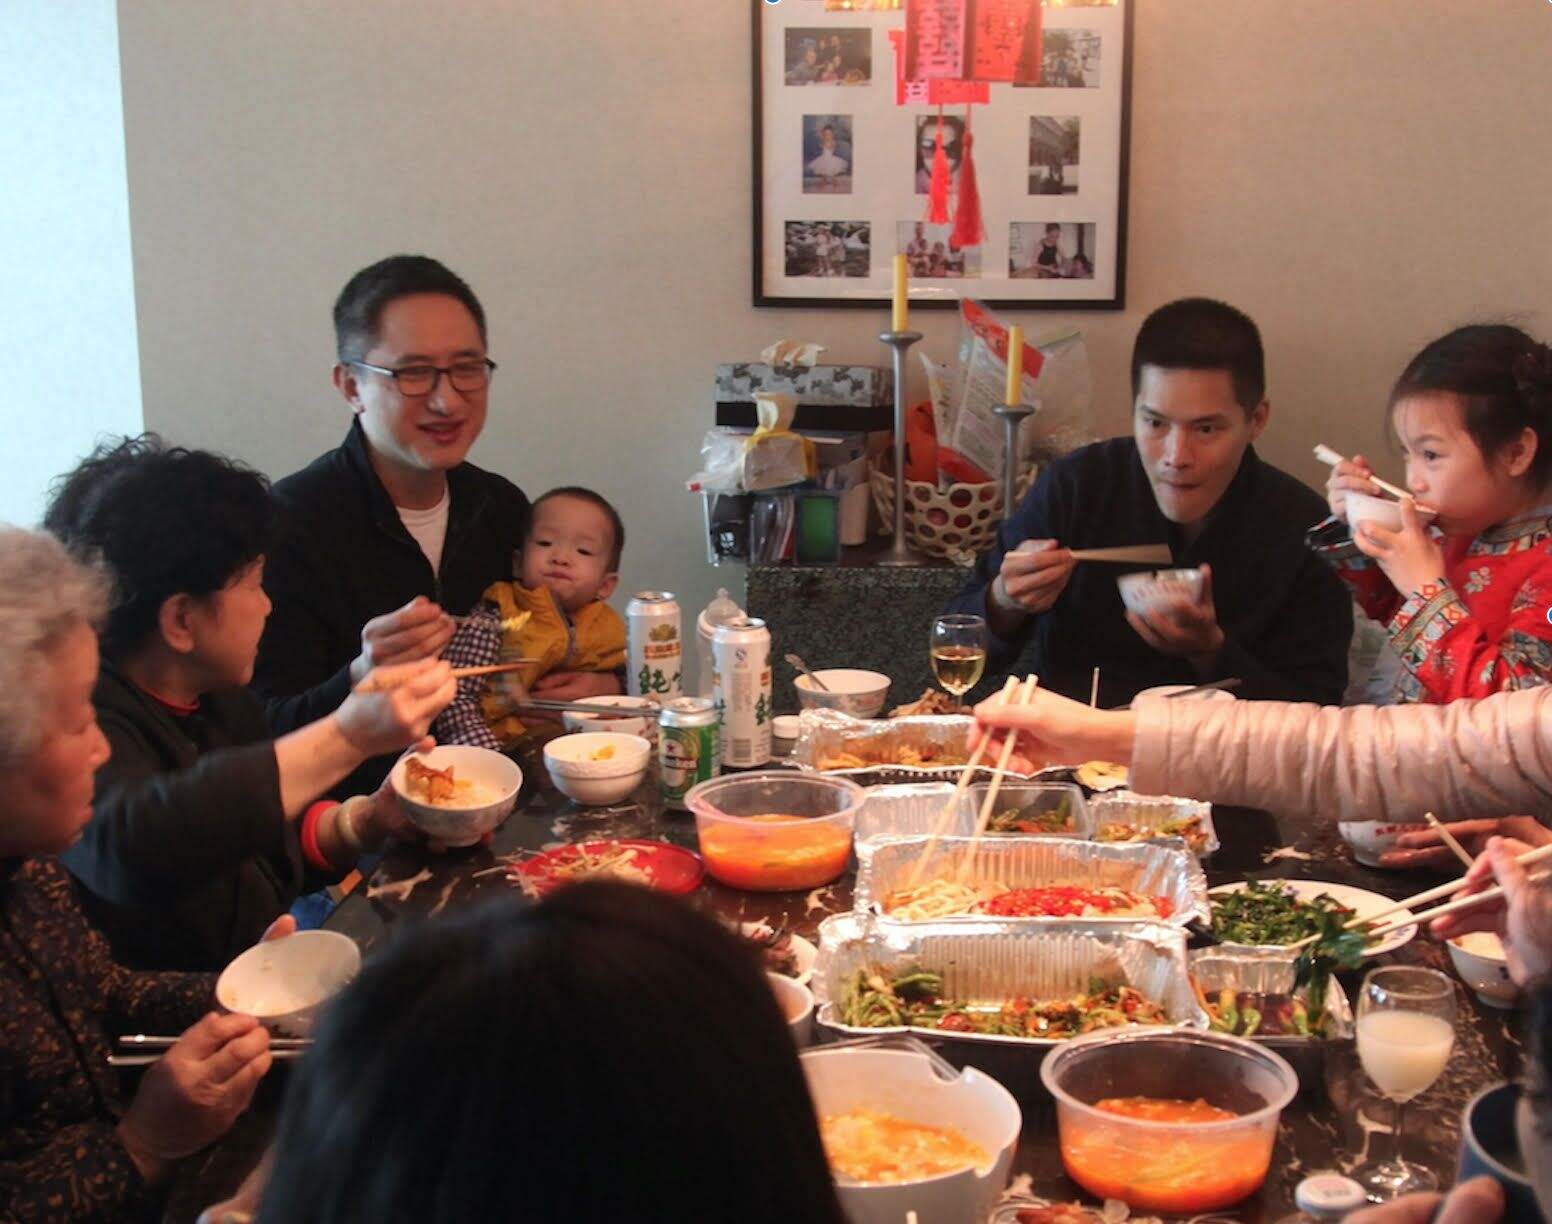 Filmmaker Hao Wu is a Chinese American male. Seen here sitting eating at a table with his child, his family members, and partner. From Hao Wu’s ‘All in My Family.’ Courtesy of Netflix.